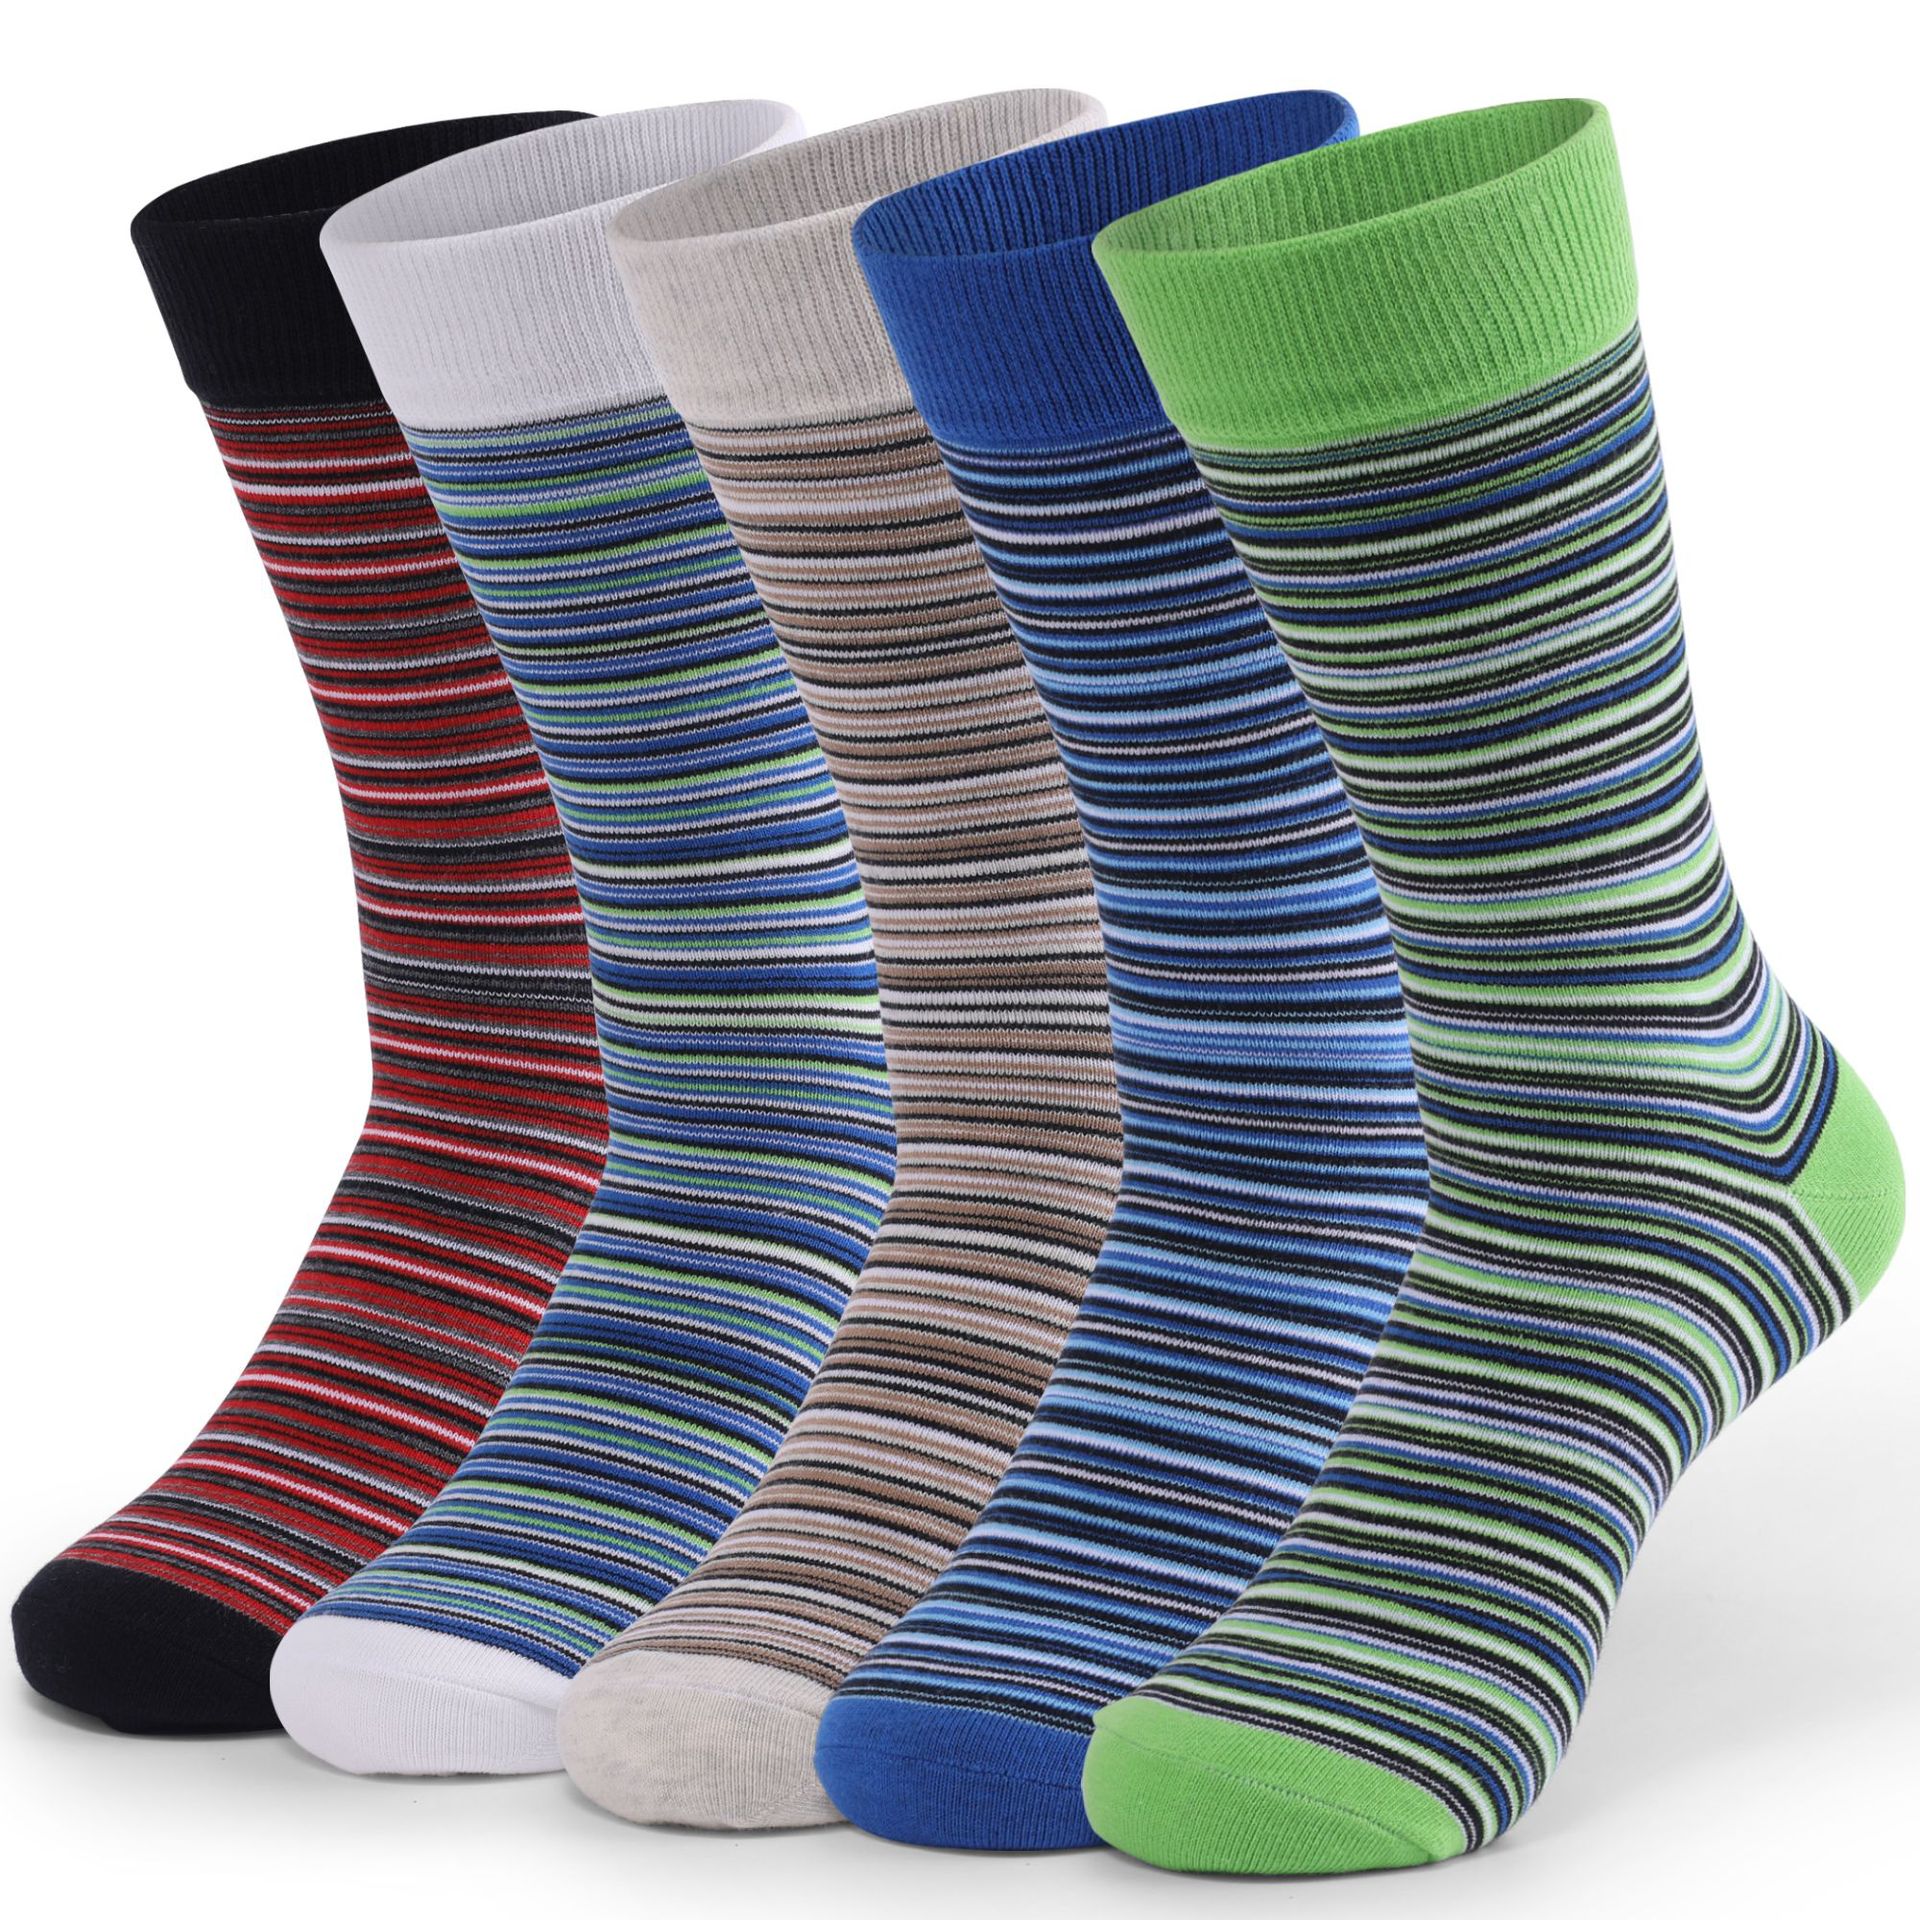 How tight should compression socks be for running?